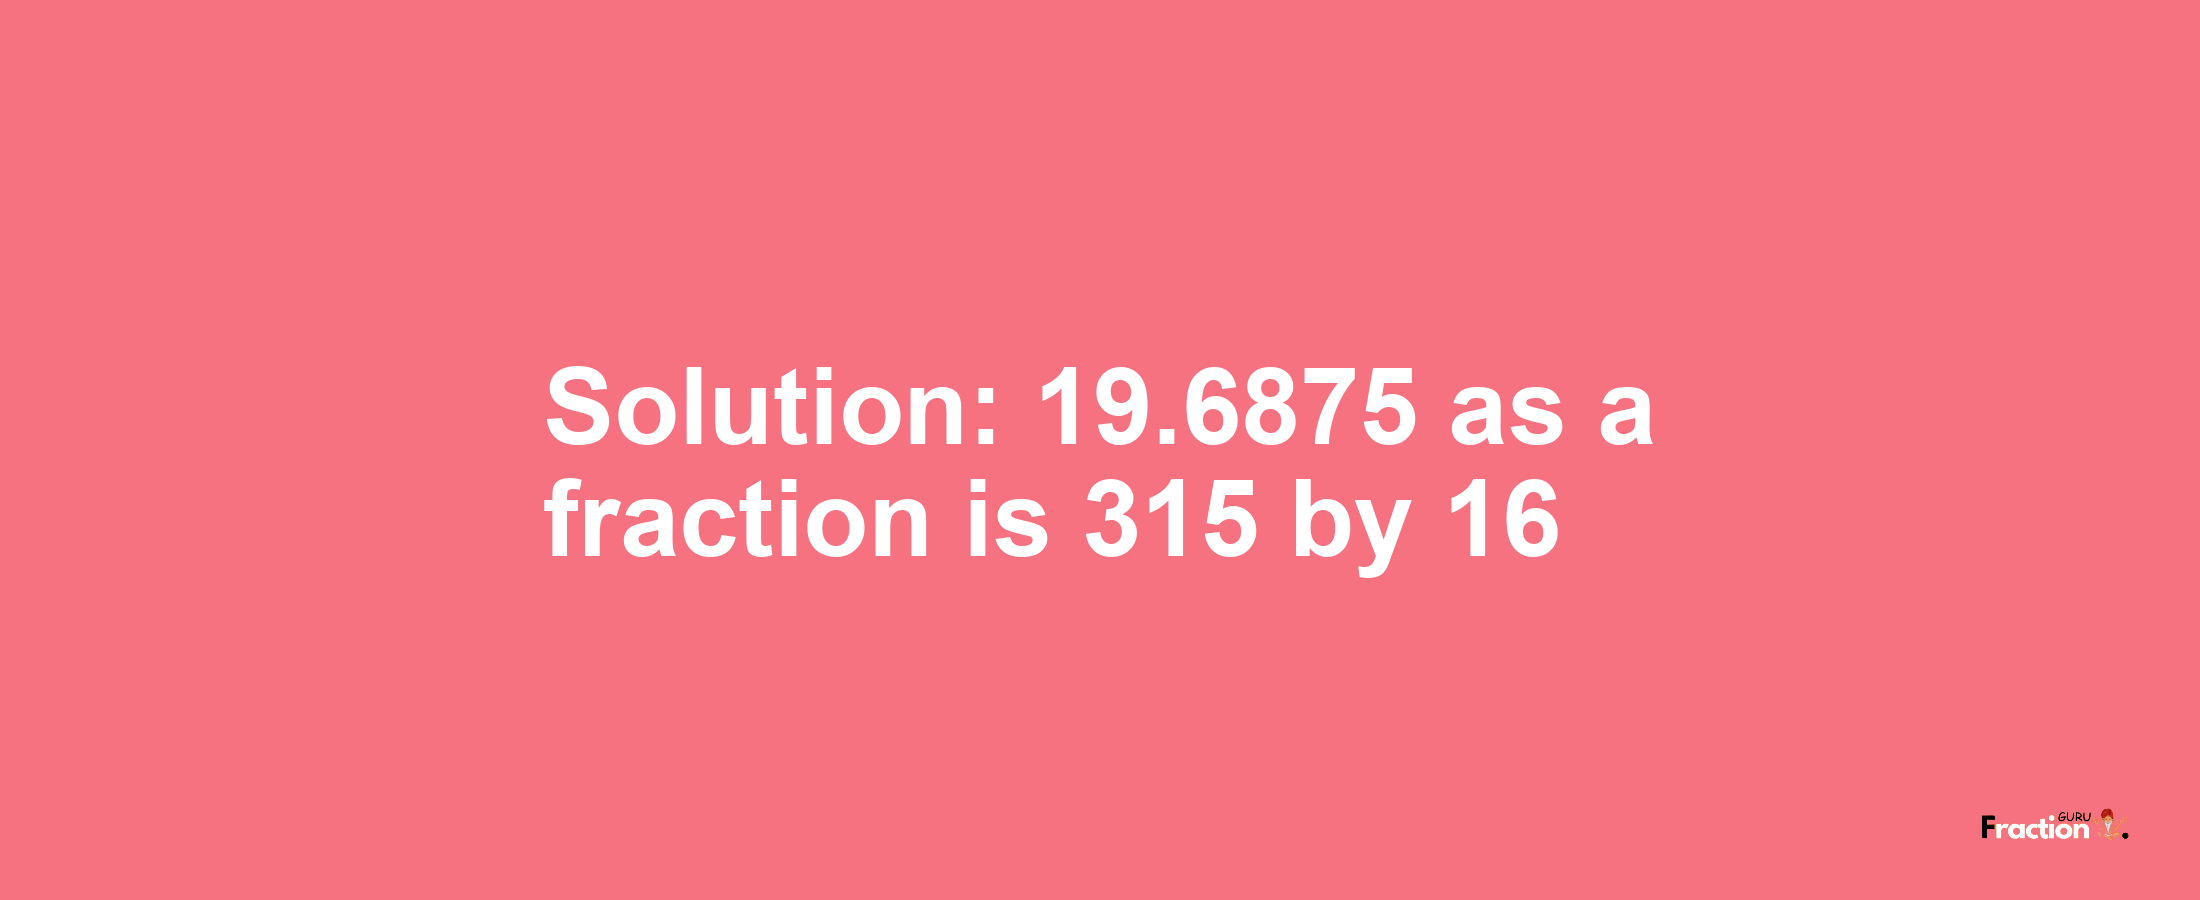 Solution:19.6875 as a fraction is 315/16